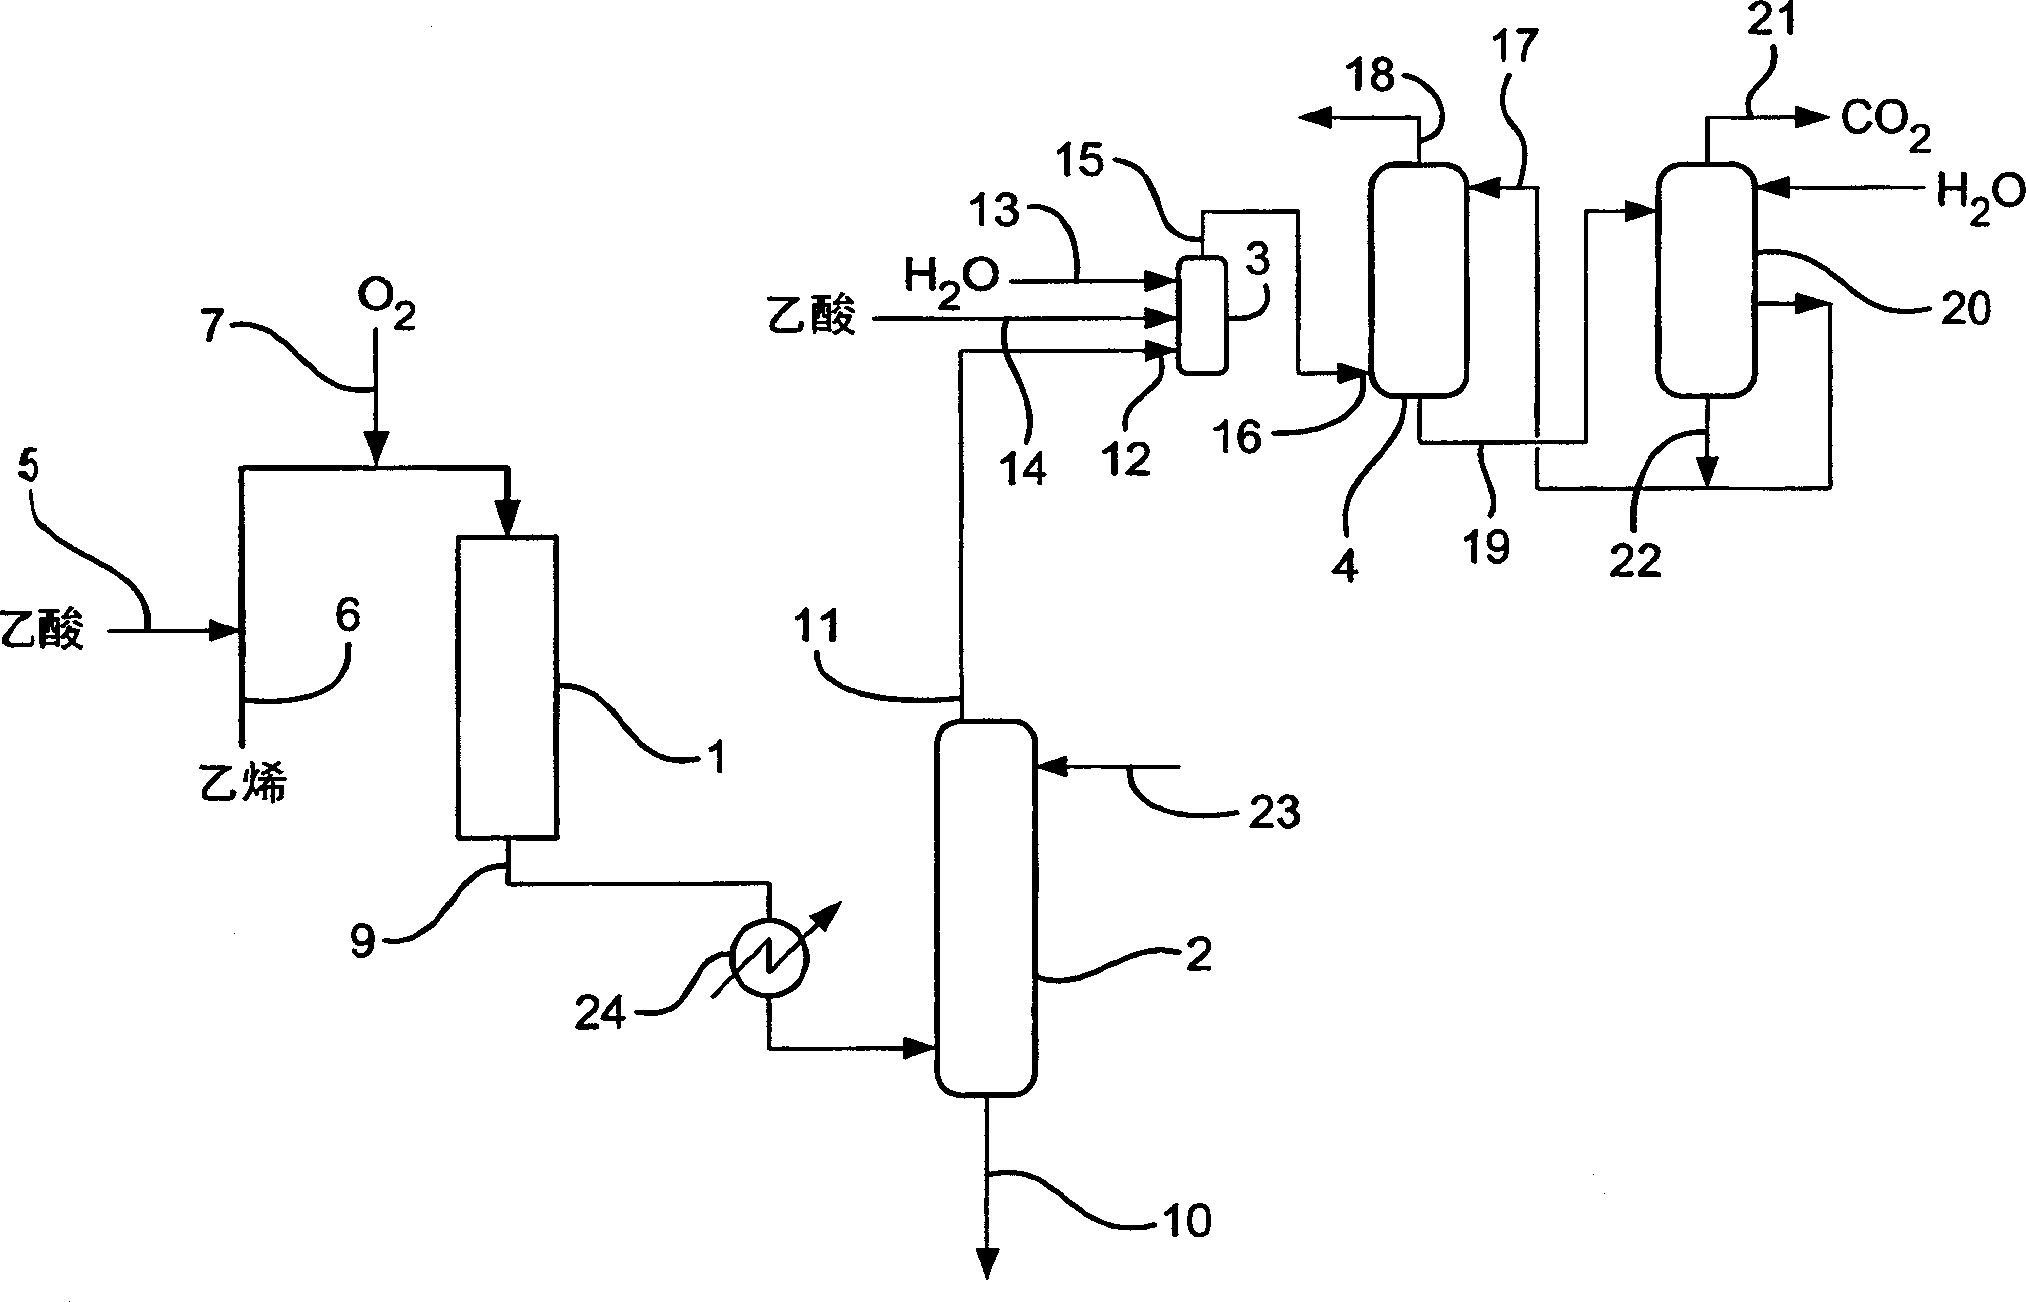 Purifying method for carbon dioxide containing air flow